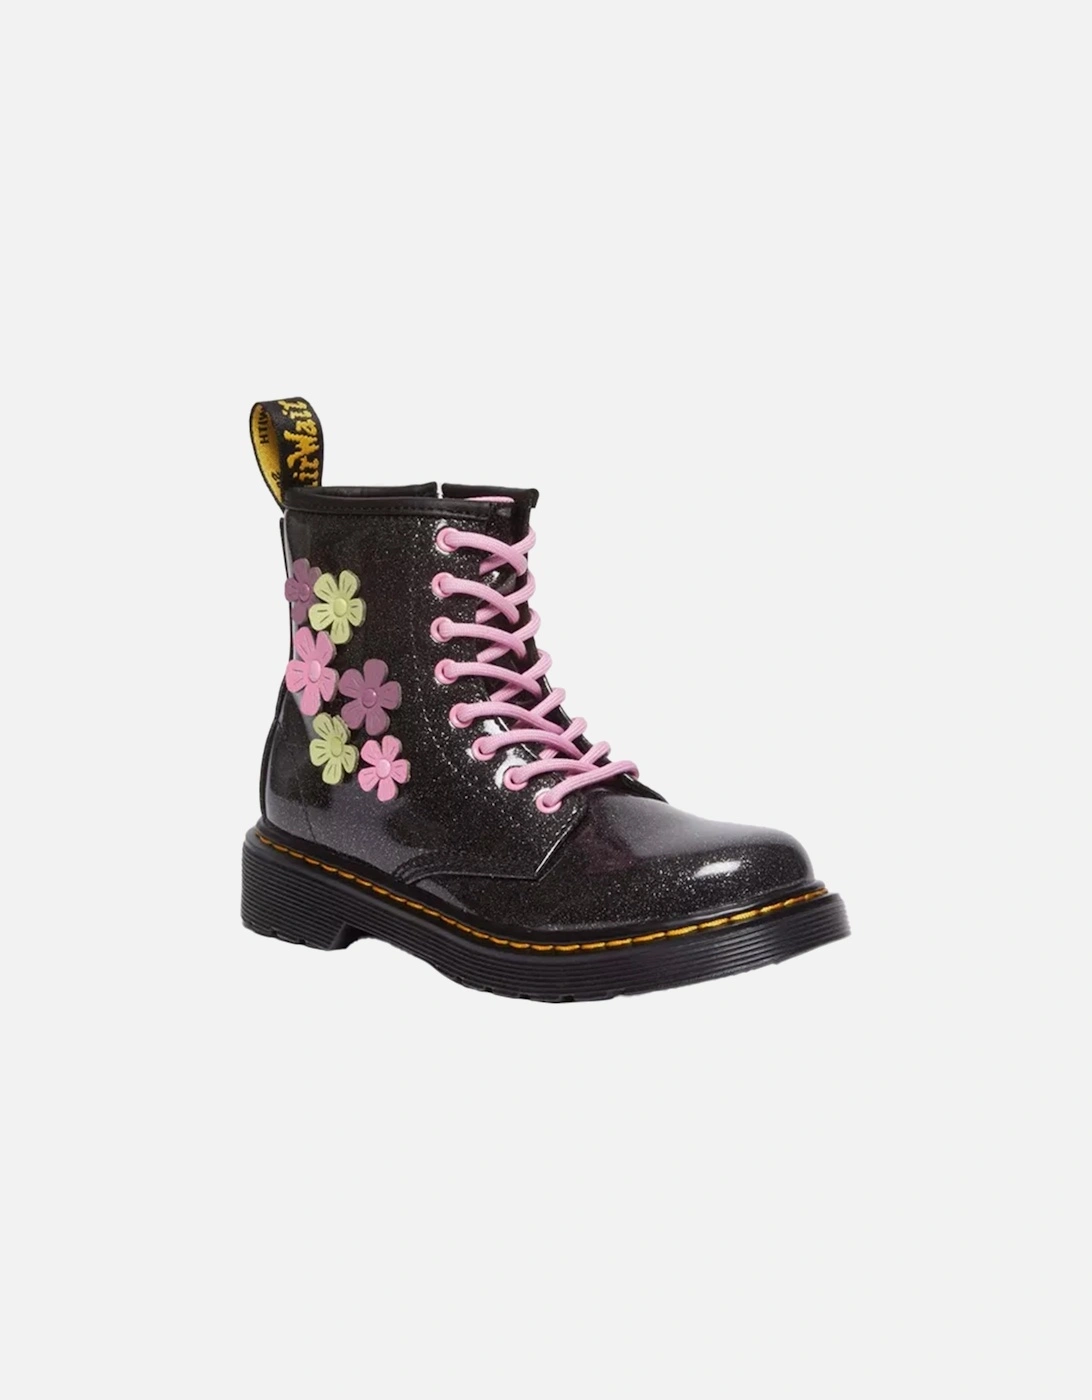 Dr. Martens Youths Gradient Glitter Boots (Black/Pink), 9 of 8